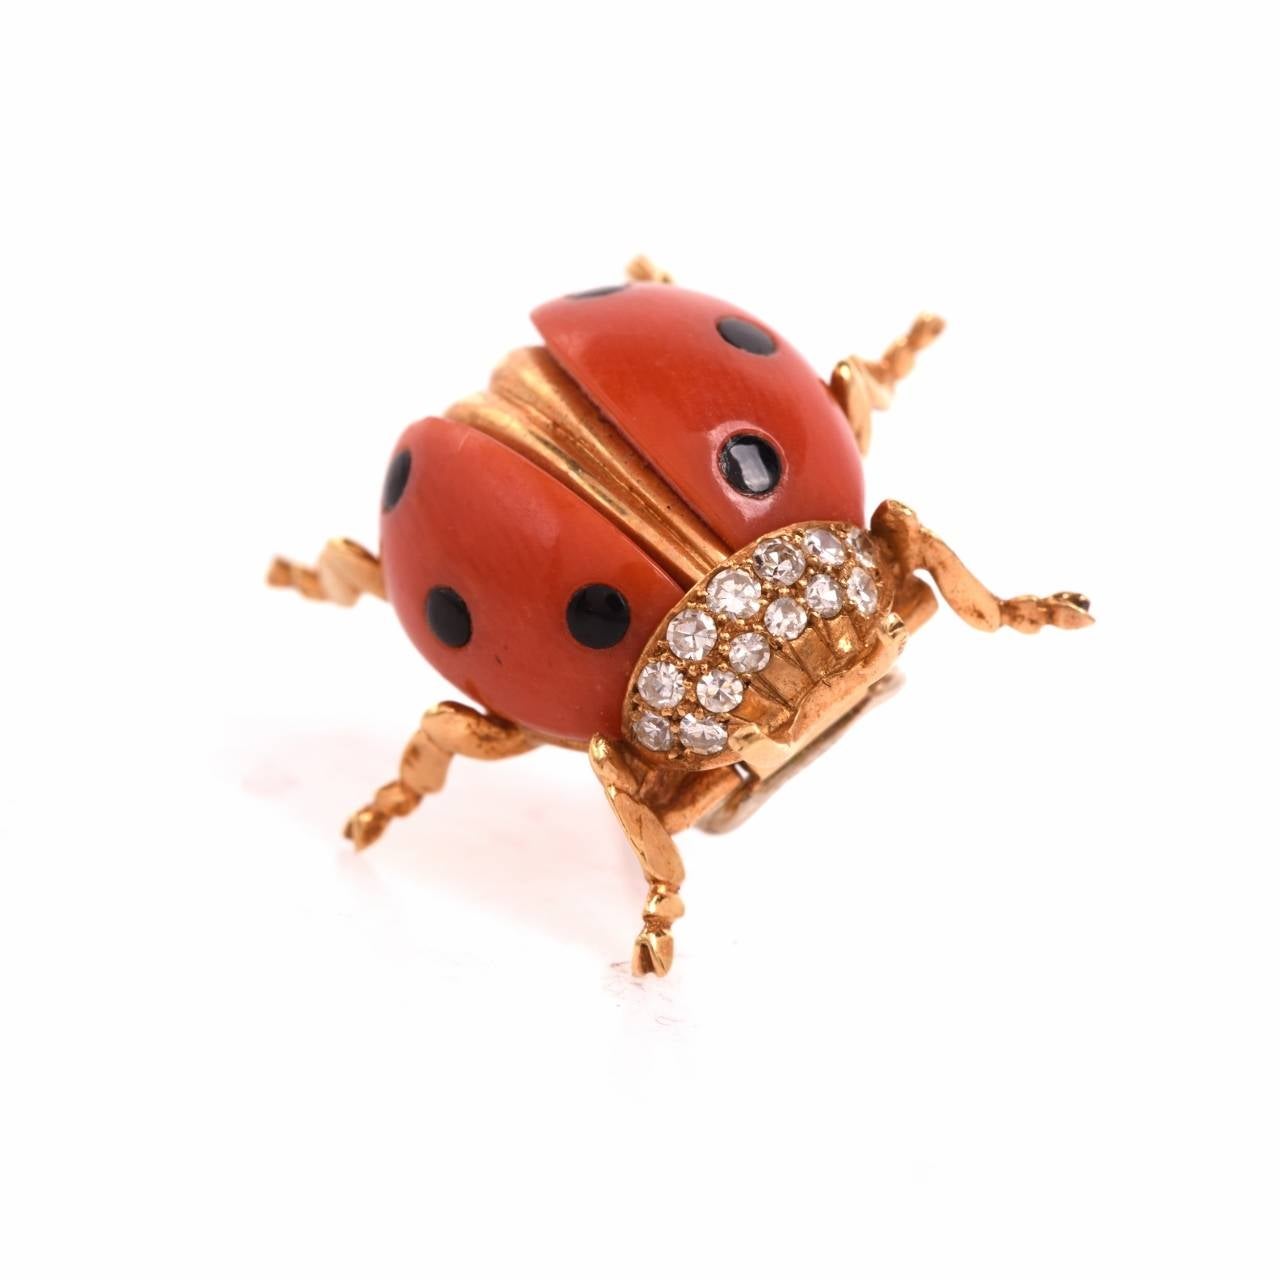 This enchantingly beautiful Tiffany & Co. lapel brooch from the vintage era is designed as a delicate and anatomically accurate sculptured silhouette of a lady beetle (also referred to as lady bug). Crafted in solid 18K yellow gold, this delicate